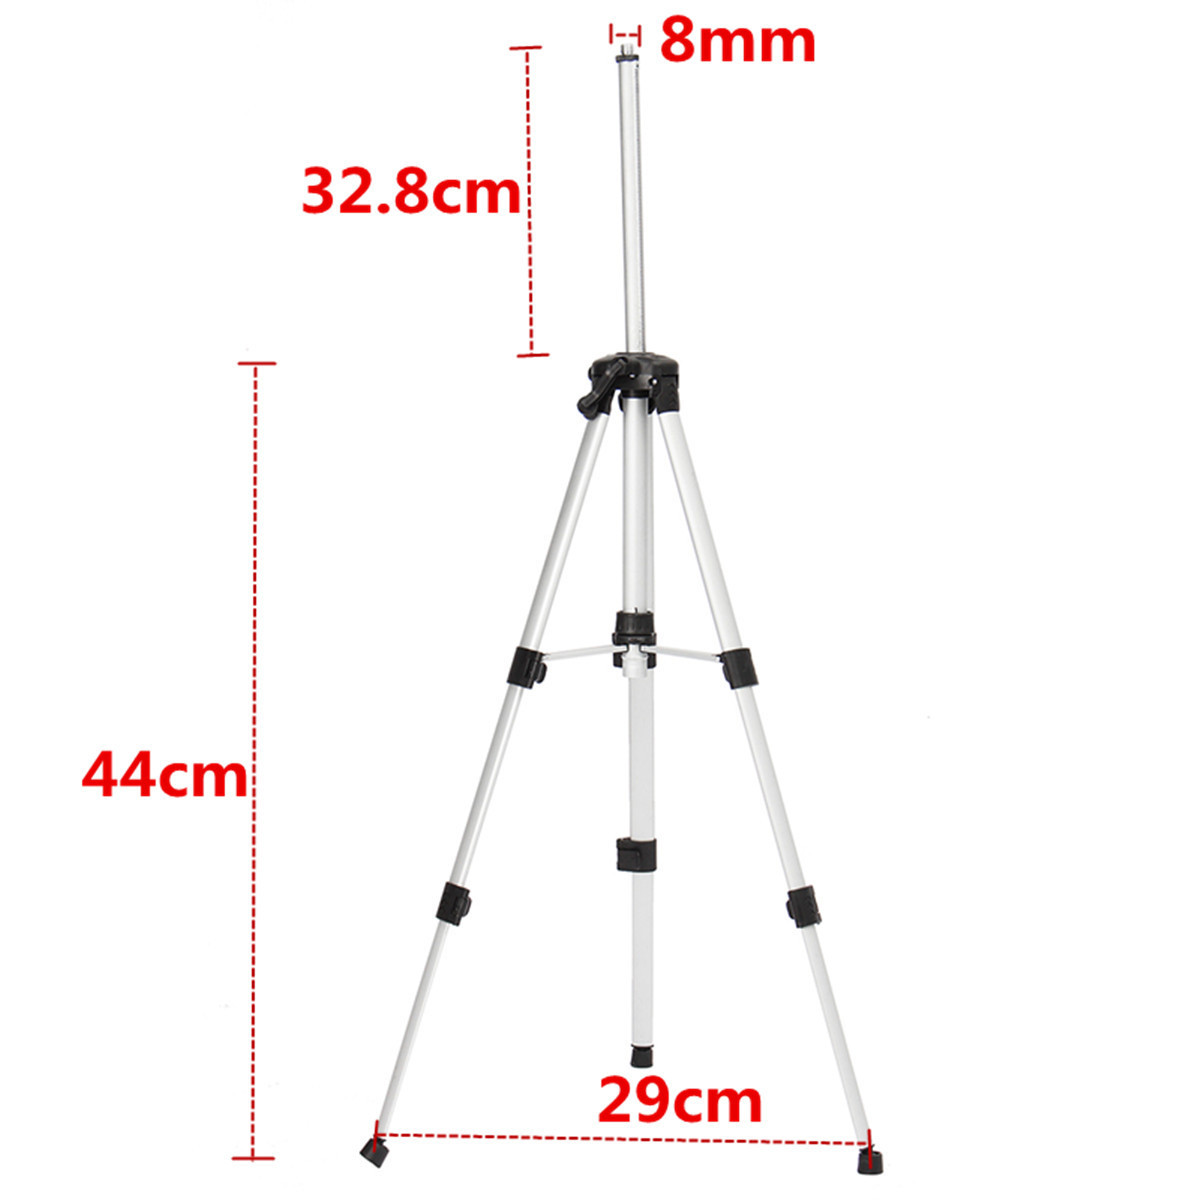 12M-Tripod-Level-Stand-for-Automatic-Self-Leveling-Laser-Level-Measurement-Tool-1131120-9